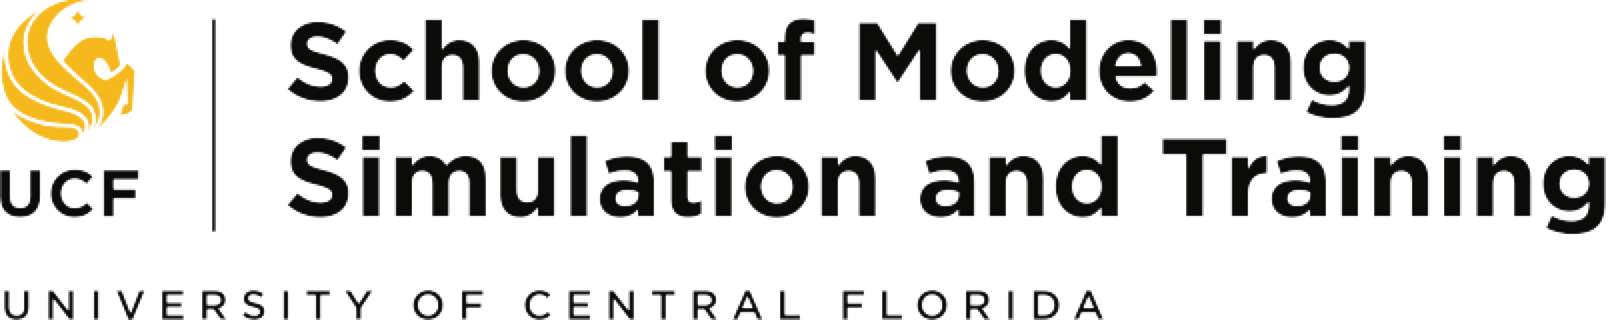 University of Central Florida School of Modeling, Simulation, and Training